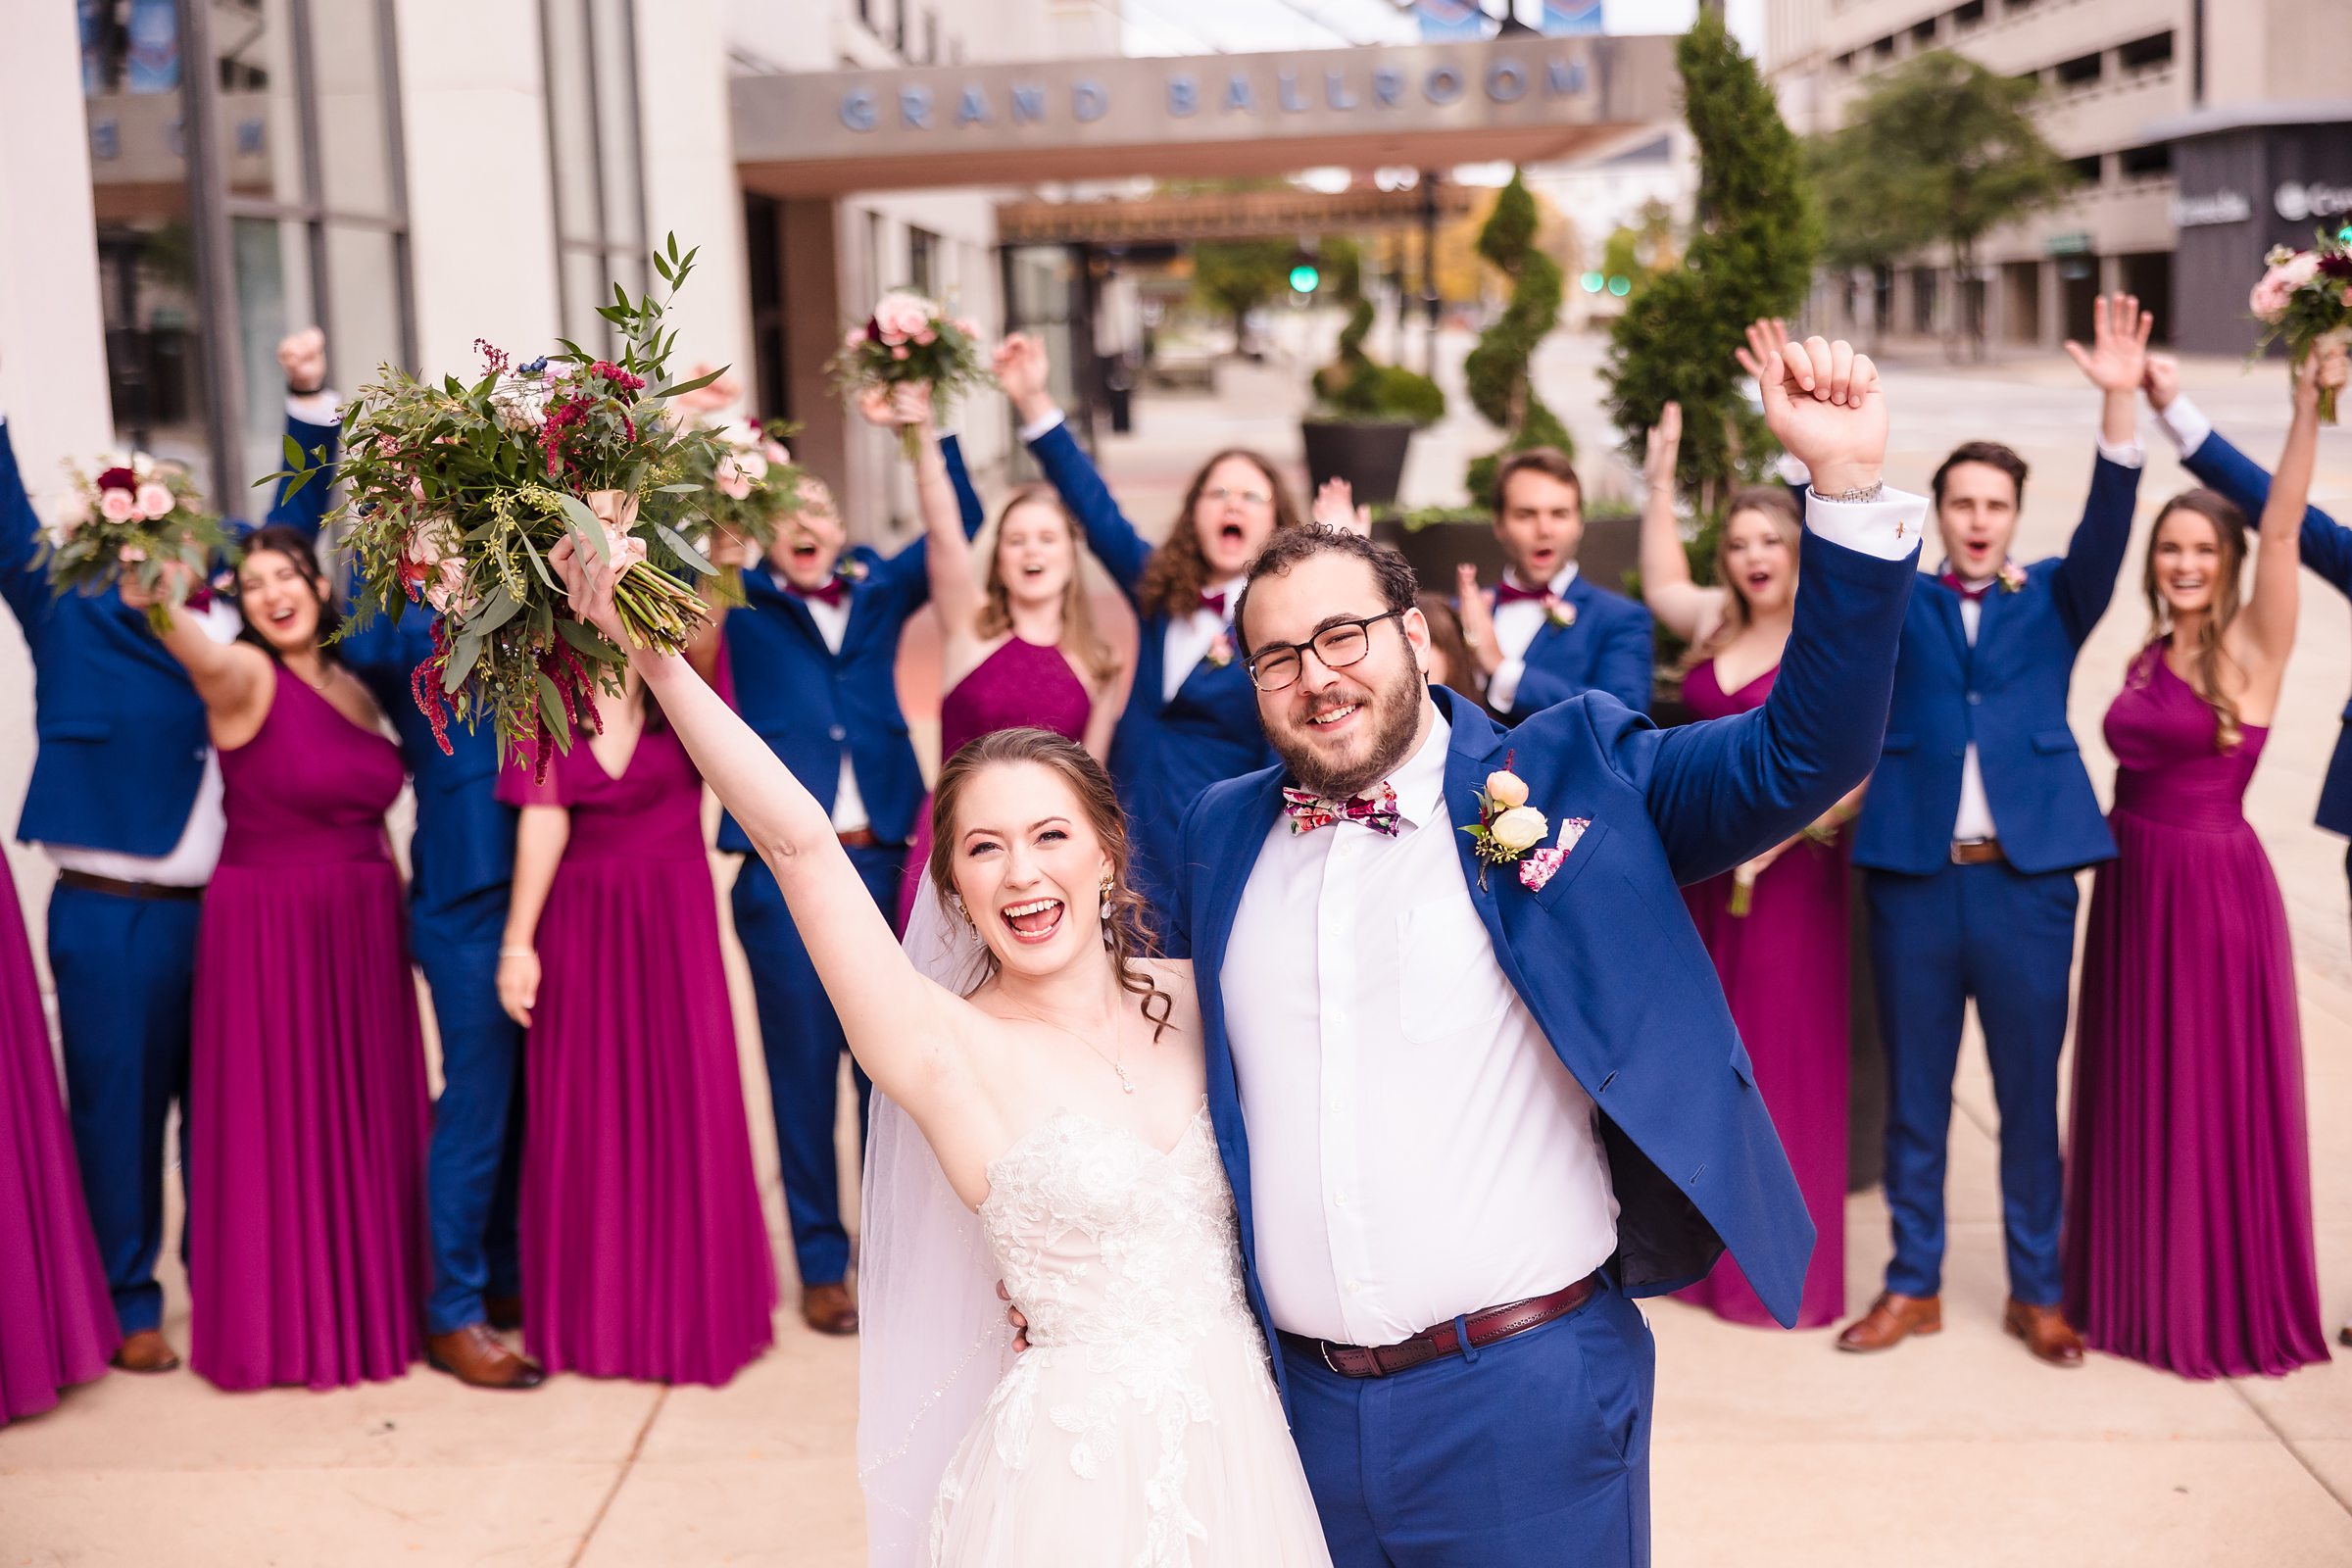 Bridal party celebrate with the couple at the Hotel Pere Marquette in Peoria, Illinois.